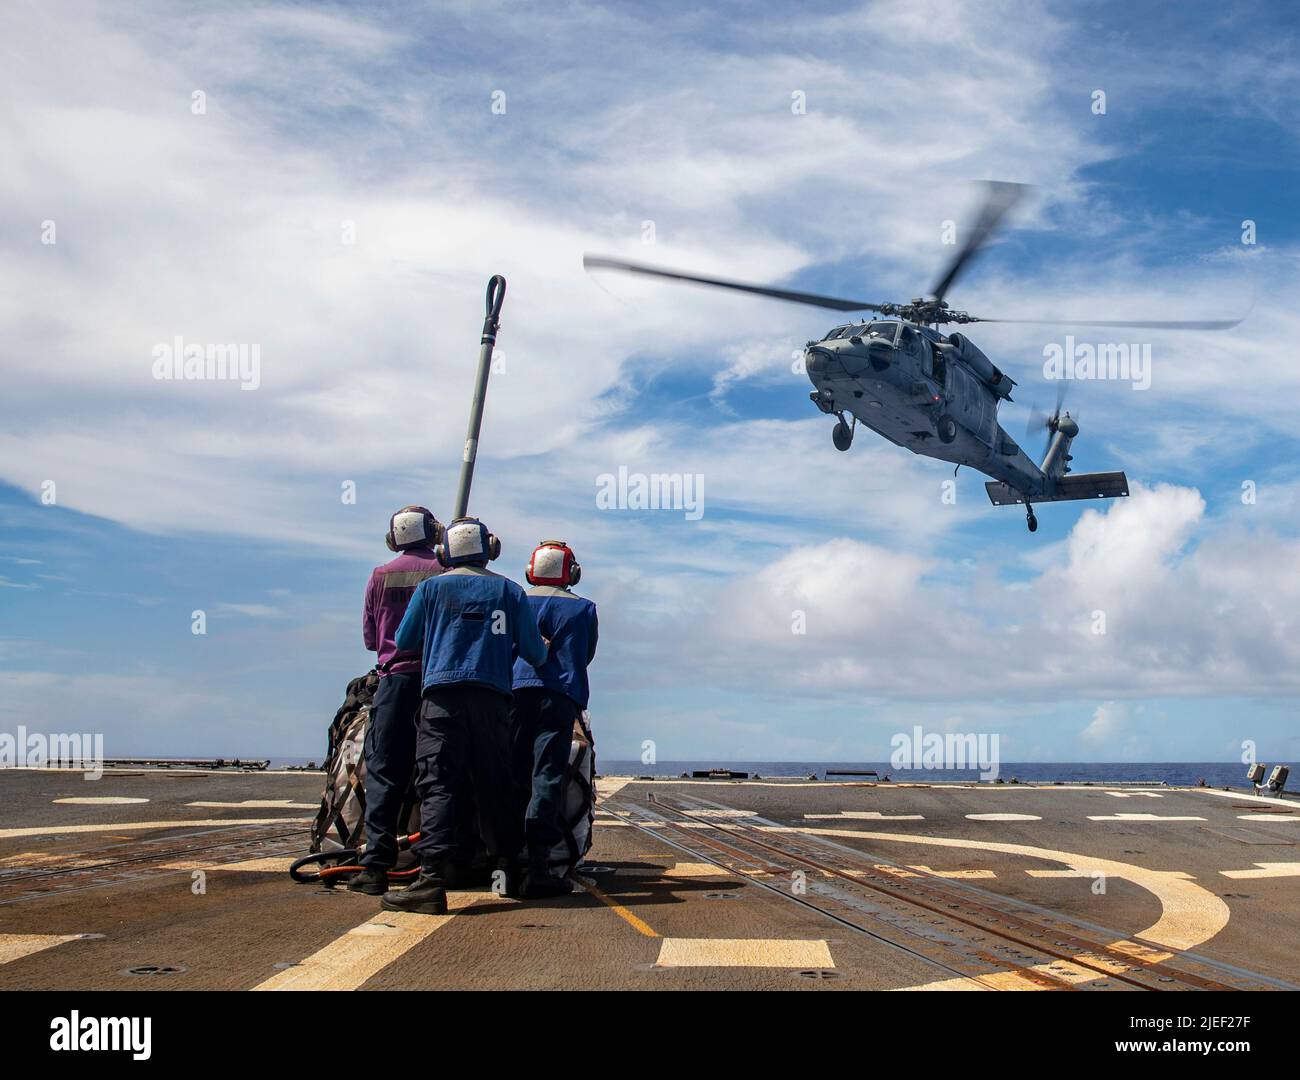 PHILIPPINE SEA (June 2, 2022) Sailors aboard the Arleigh Burke-class guided-missile destroyer USS Dewey (DDG 105) prepare to attach cargo to an MH-60S Sea Hawk helicopter, assigned to the “Chargers” of Helicopter Sea Combat Squadron (HSC) 14, during a vertical replenishment with the Ticonderoga-class guided-missile cruiser USS Mobile Bay (CG 53). Abraham Lincoln Strike Group is on a scheduled deployment in the U.S. 7th Fleet area of operations to enhance interoperability through alliances and partnerships while serving as a ready-response force in support of a free and open Indo-Pacific region Stock Photo